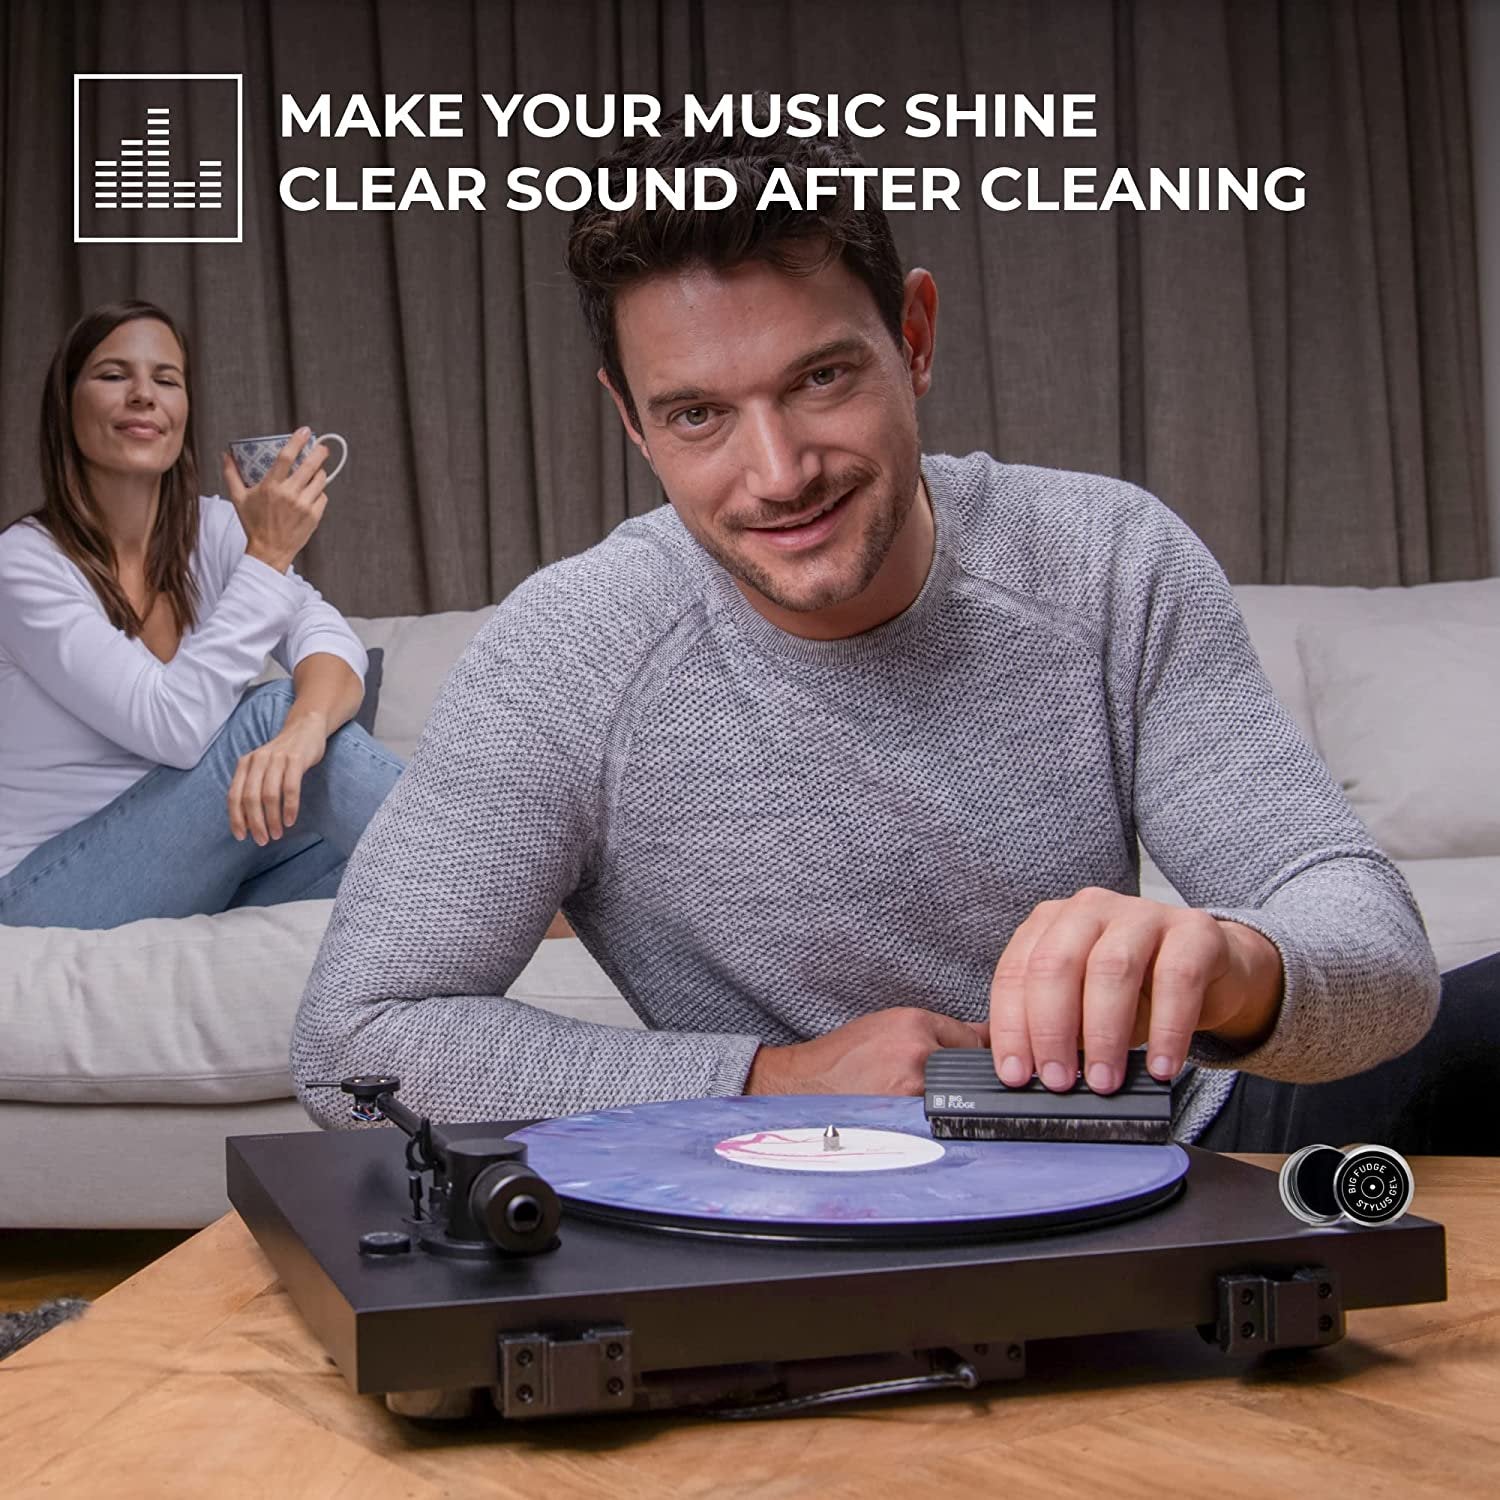 Make-Your-Music-Shine-Clear-Sound-After-Cleaning